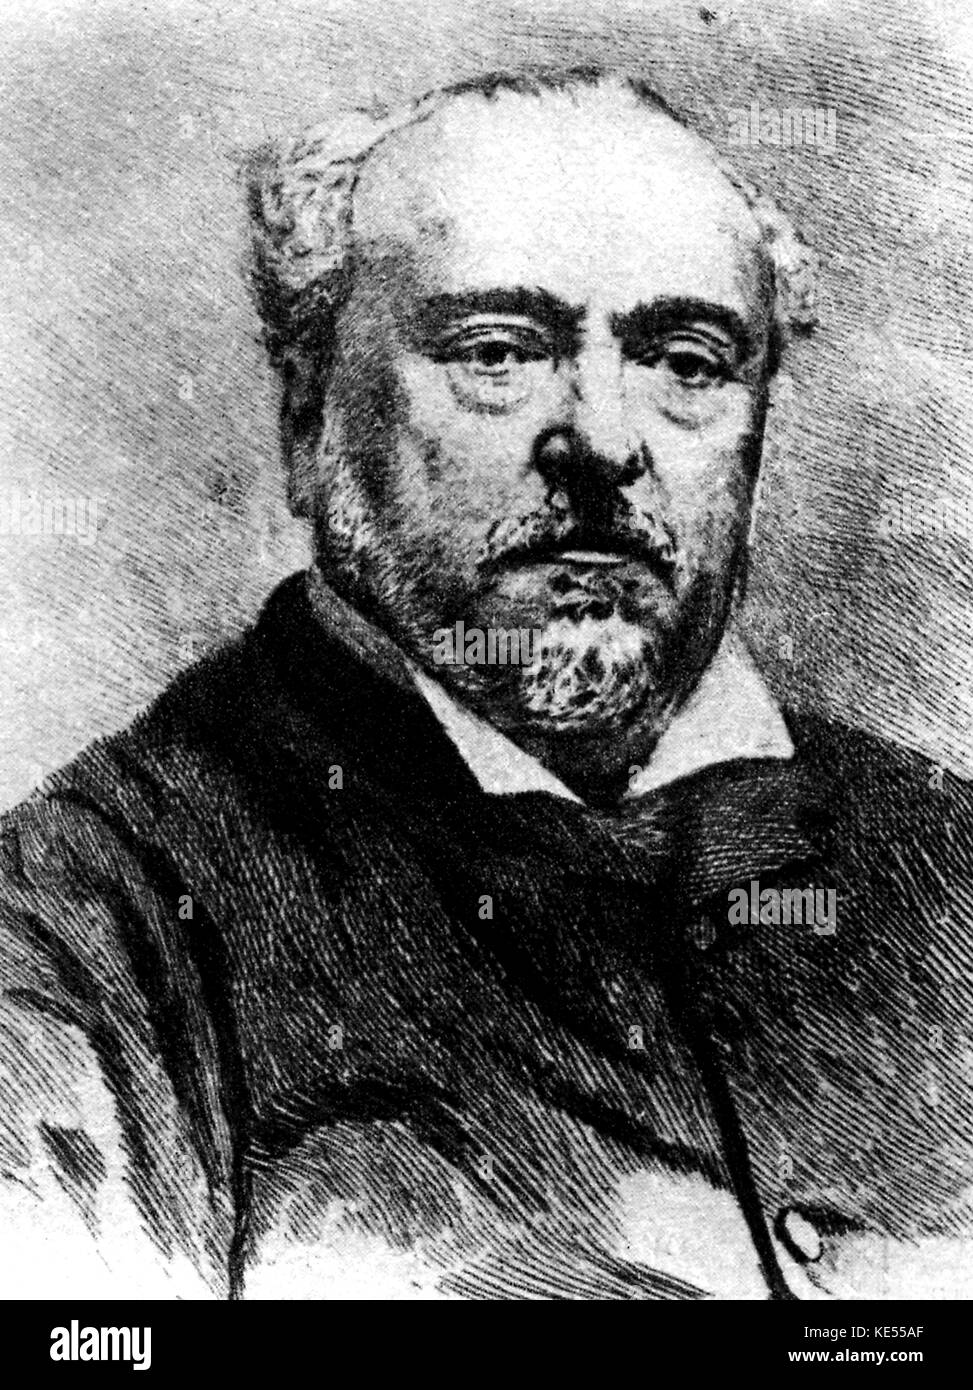 Emmanuel Chabrier (1841 -1894) - portrait engraving of French composer by Desmoulin. Charbrier cited as an influence on Claude Debussy 's work. CD: French composer, 22 August 1862 - 25 March 1918. Stock Photo